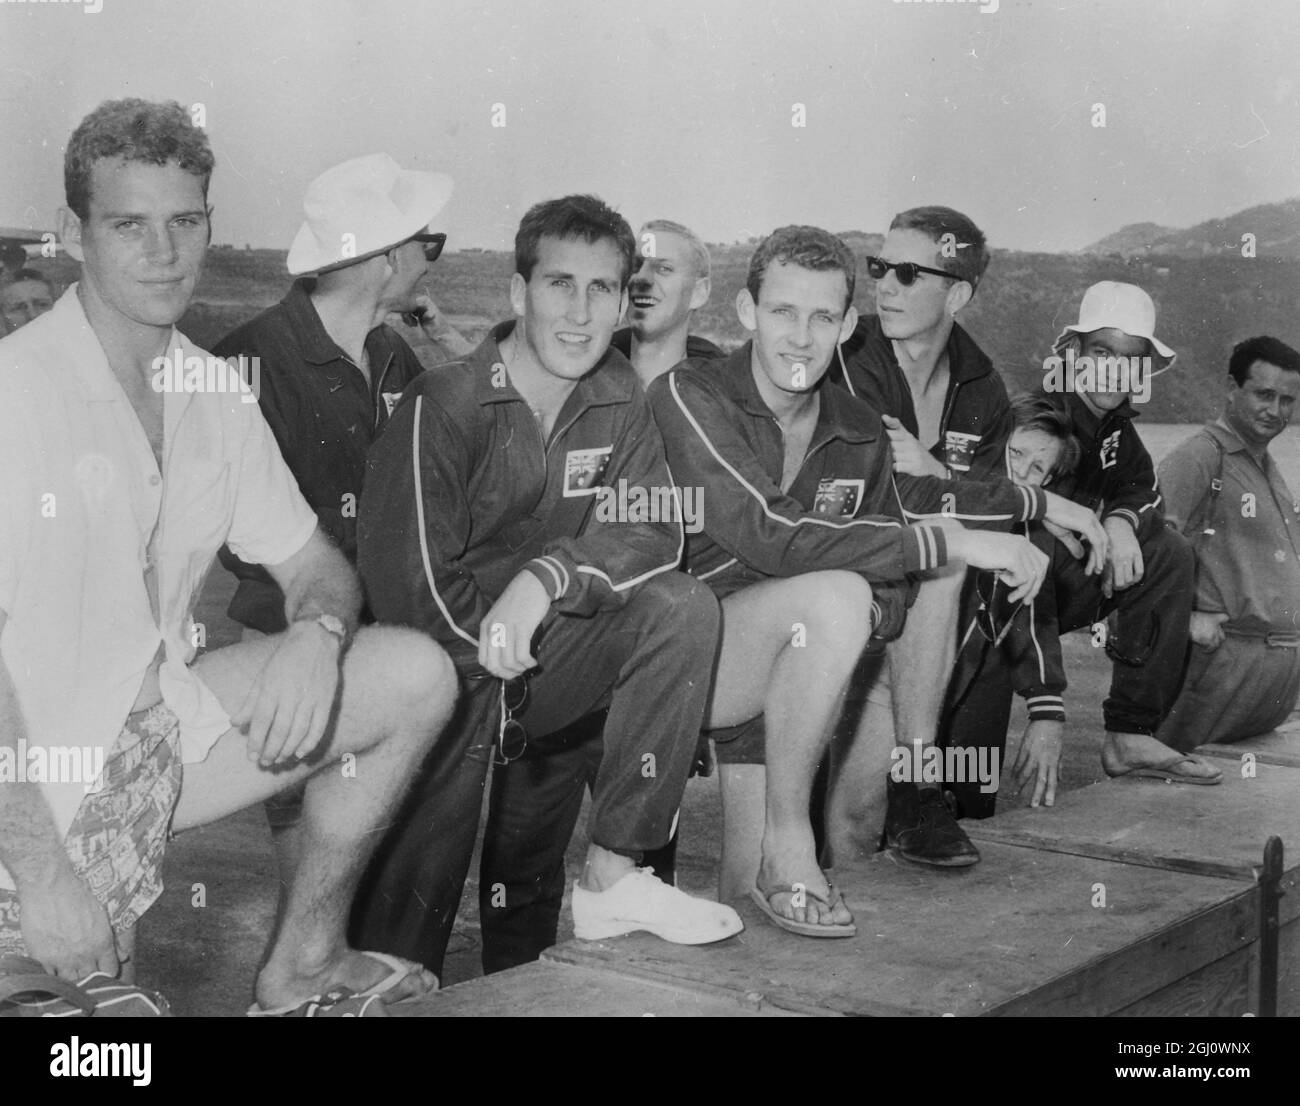 Australian rowing team Black and White Stock Photos & Images - Alamy